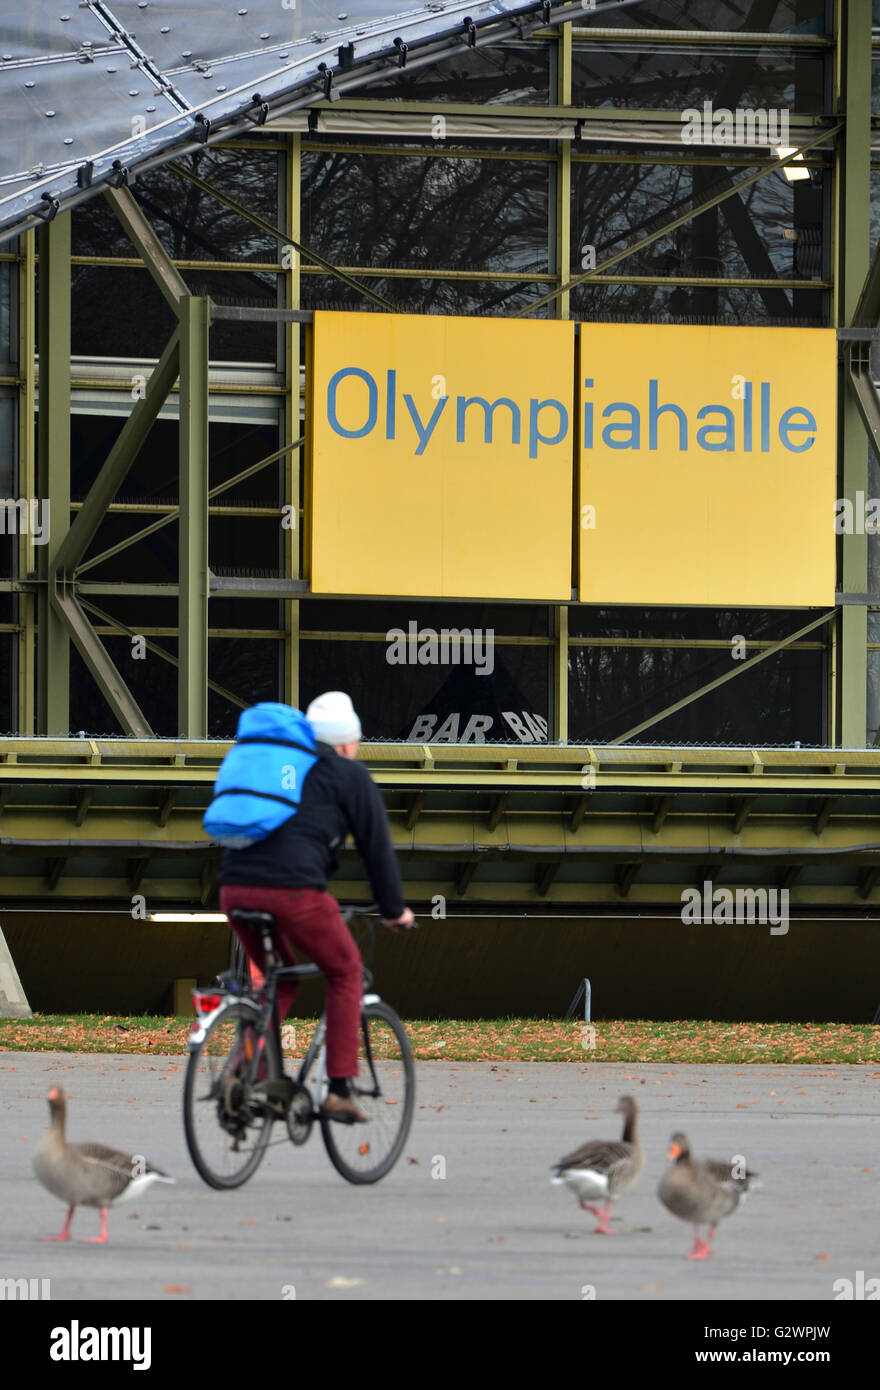 14.11.2015, Munich, Bavaria, Germany - Detail of the Olympiahalle of the Olympiapark Munich. 0HD160104D032CAROEX.JPG - NOT for SALE in G E R M A N Y, A U S T R I A, S W I T Z E R L A N D [MODEL RELEASE: NO, PROPERTY RELEASE: NO, (c) caro photo agency / Dittrich, http://www.caro-images.com, info@carofoto.pl - Any use of this picture is subject to royalty!] Stock Photo